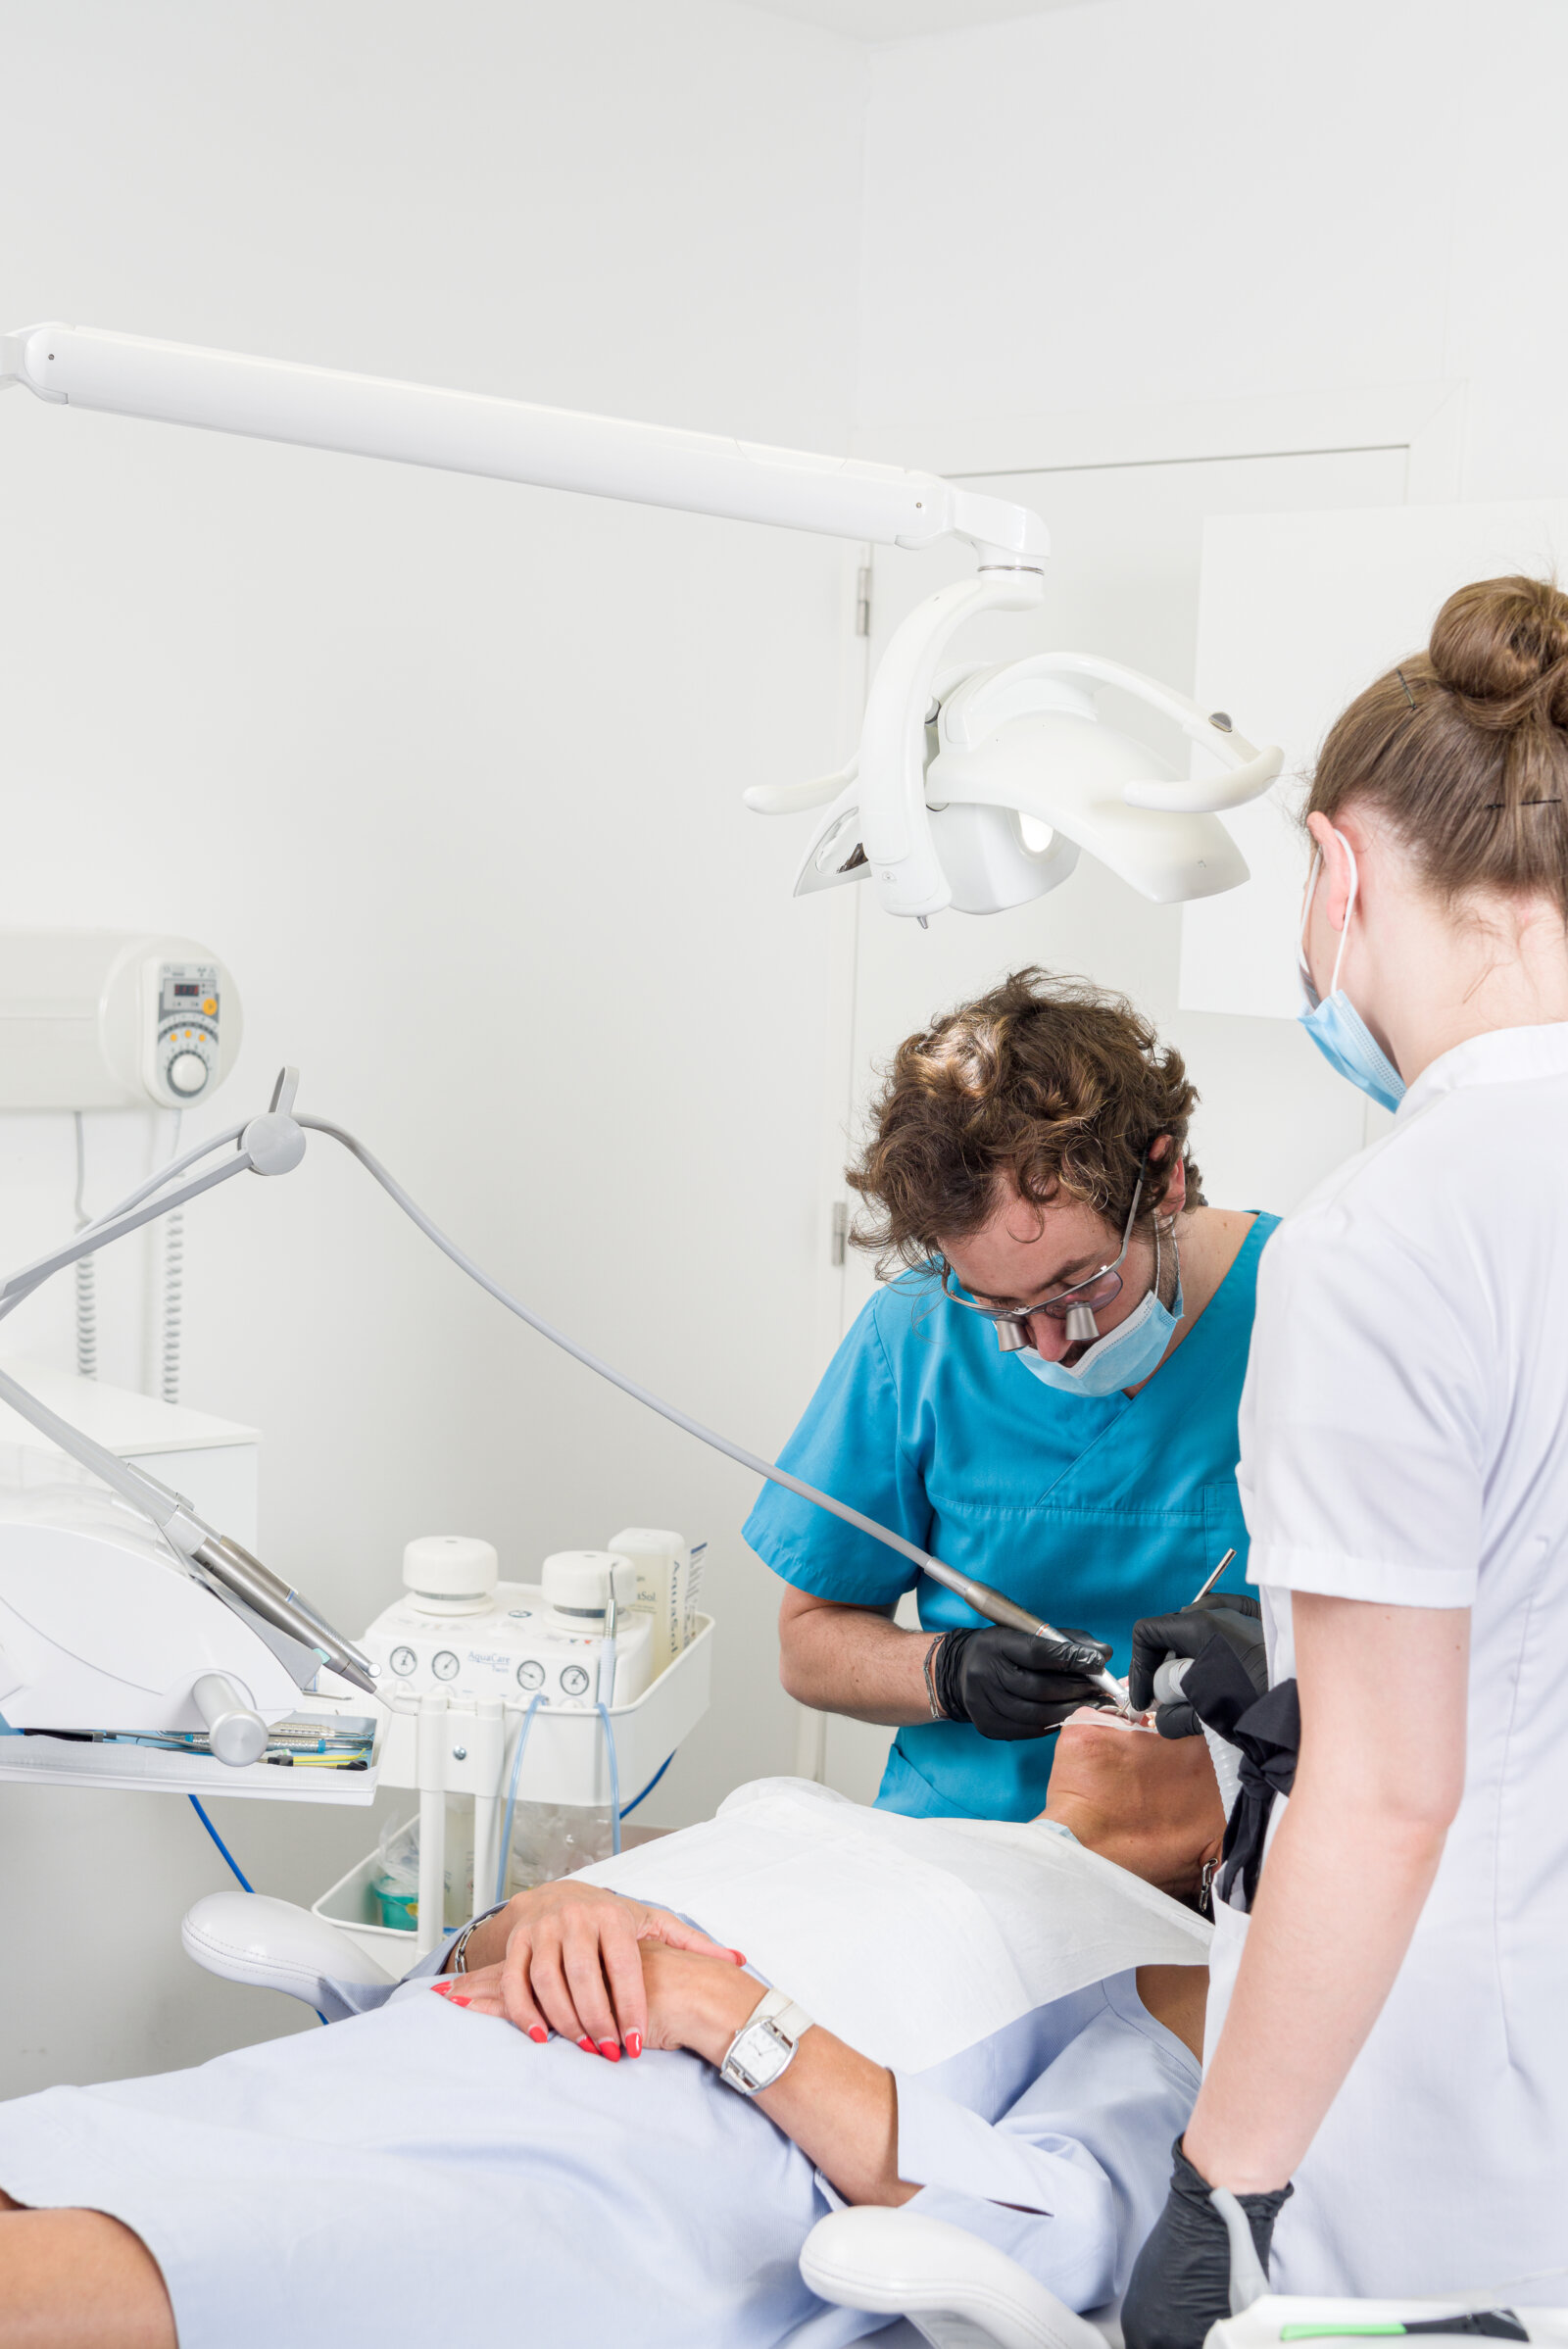 What is restorative dentistry?